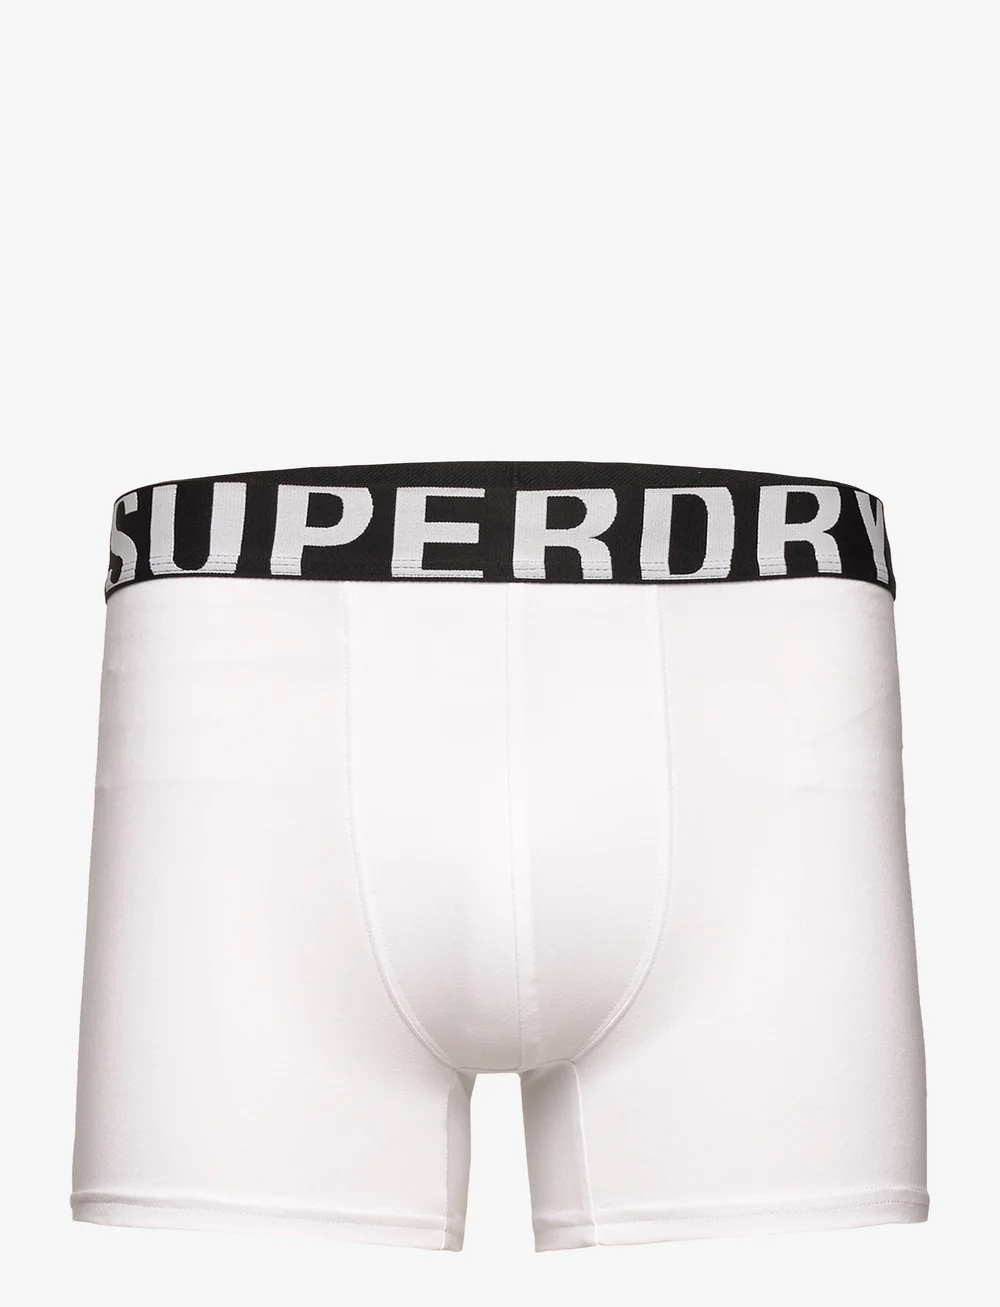 honning sfærisk Foragt Superdry Boxer Dual Logo Double Pack - Boxershorts - Boozt.com